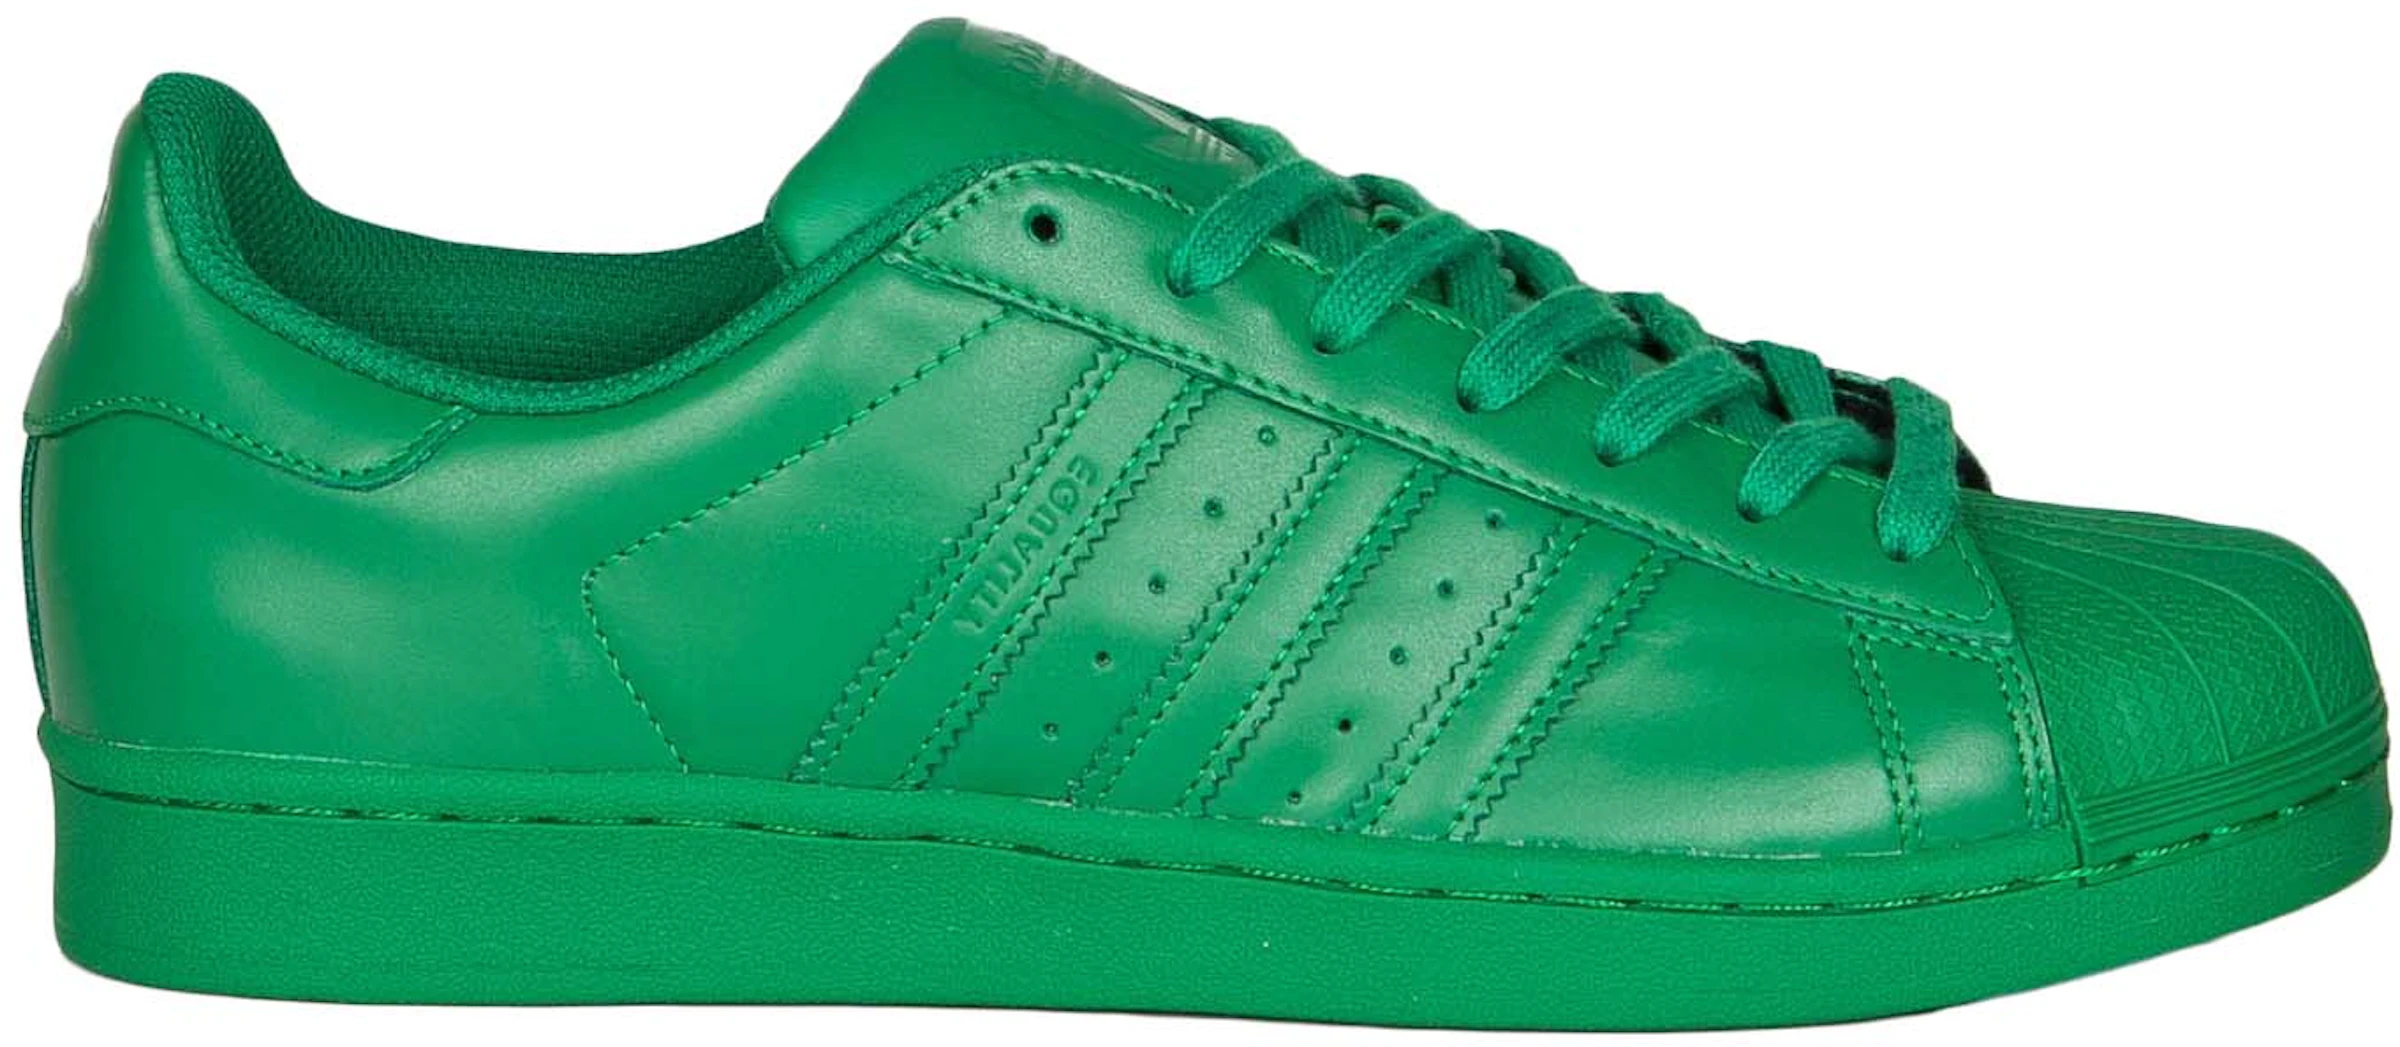 adidas Superstar Pharell Supercolor Pack Green S83389 - US